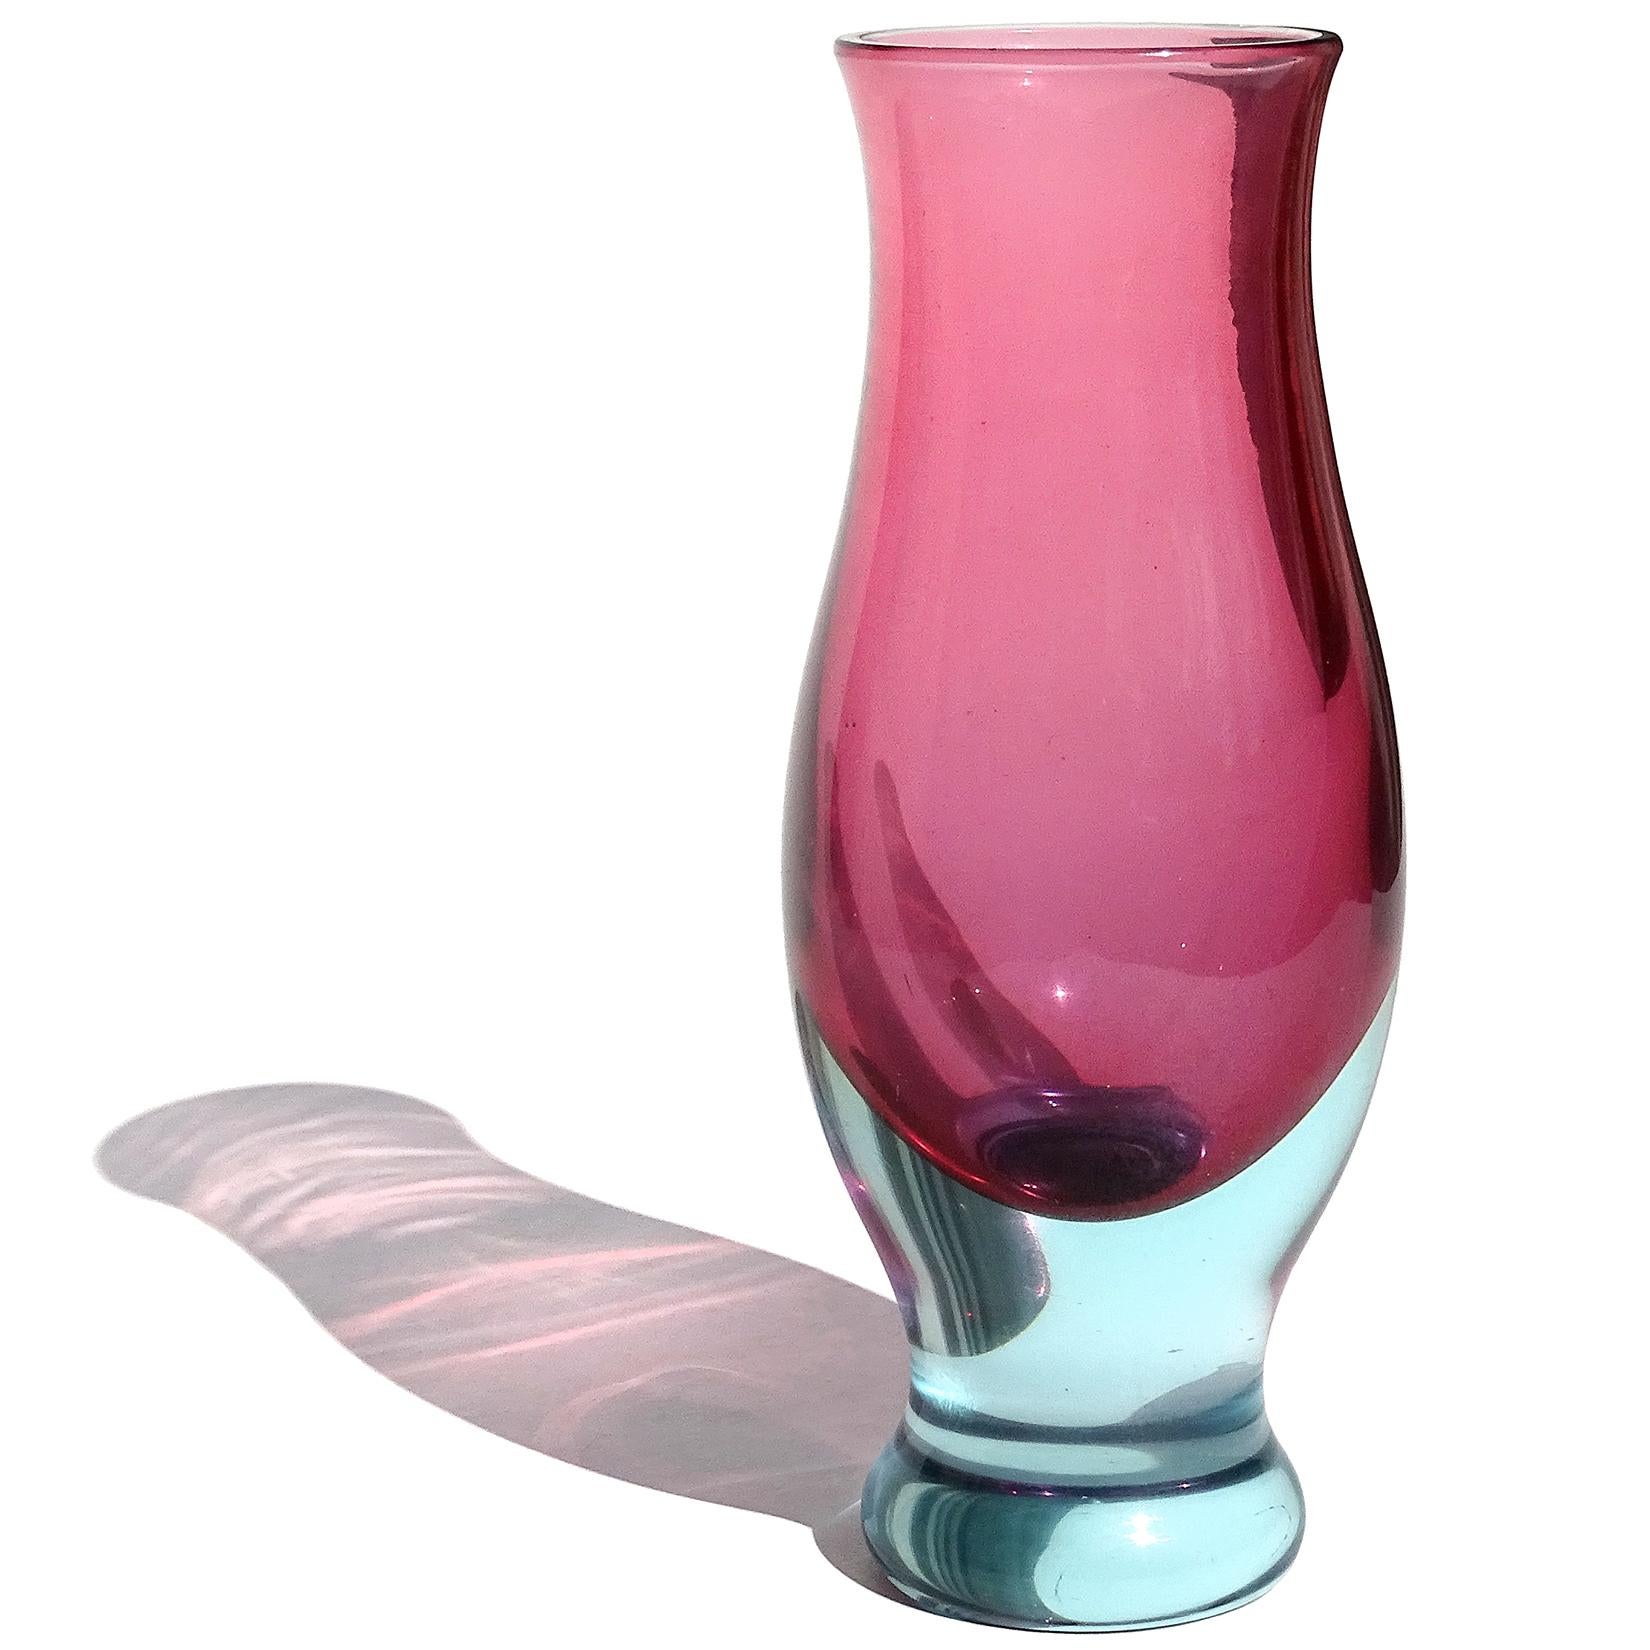 Beautiful vintage Murano hand blown Sommerso blue and pink Italian art glass flower vase. Documented to designer Archimede Seguso. The vase has a partial 